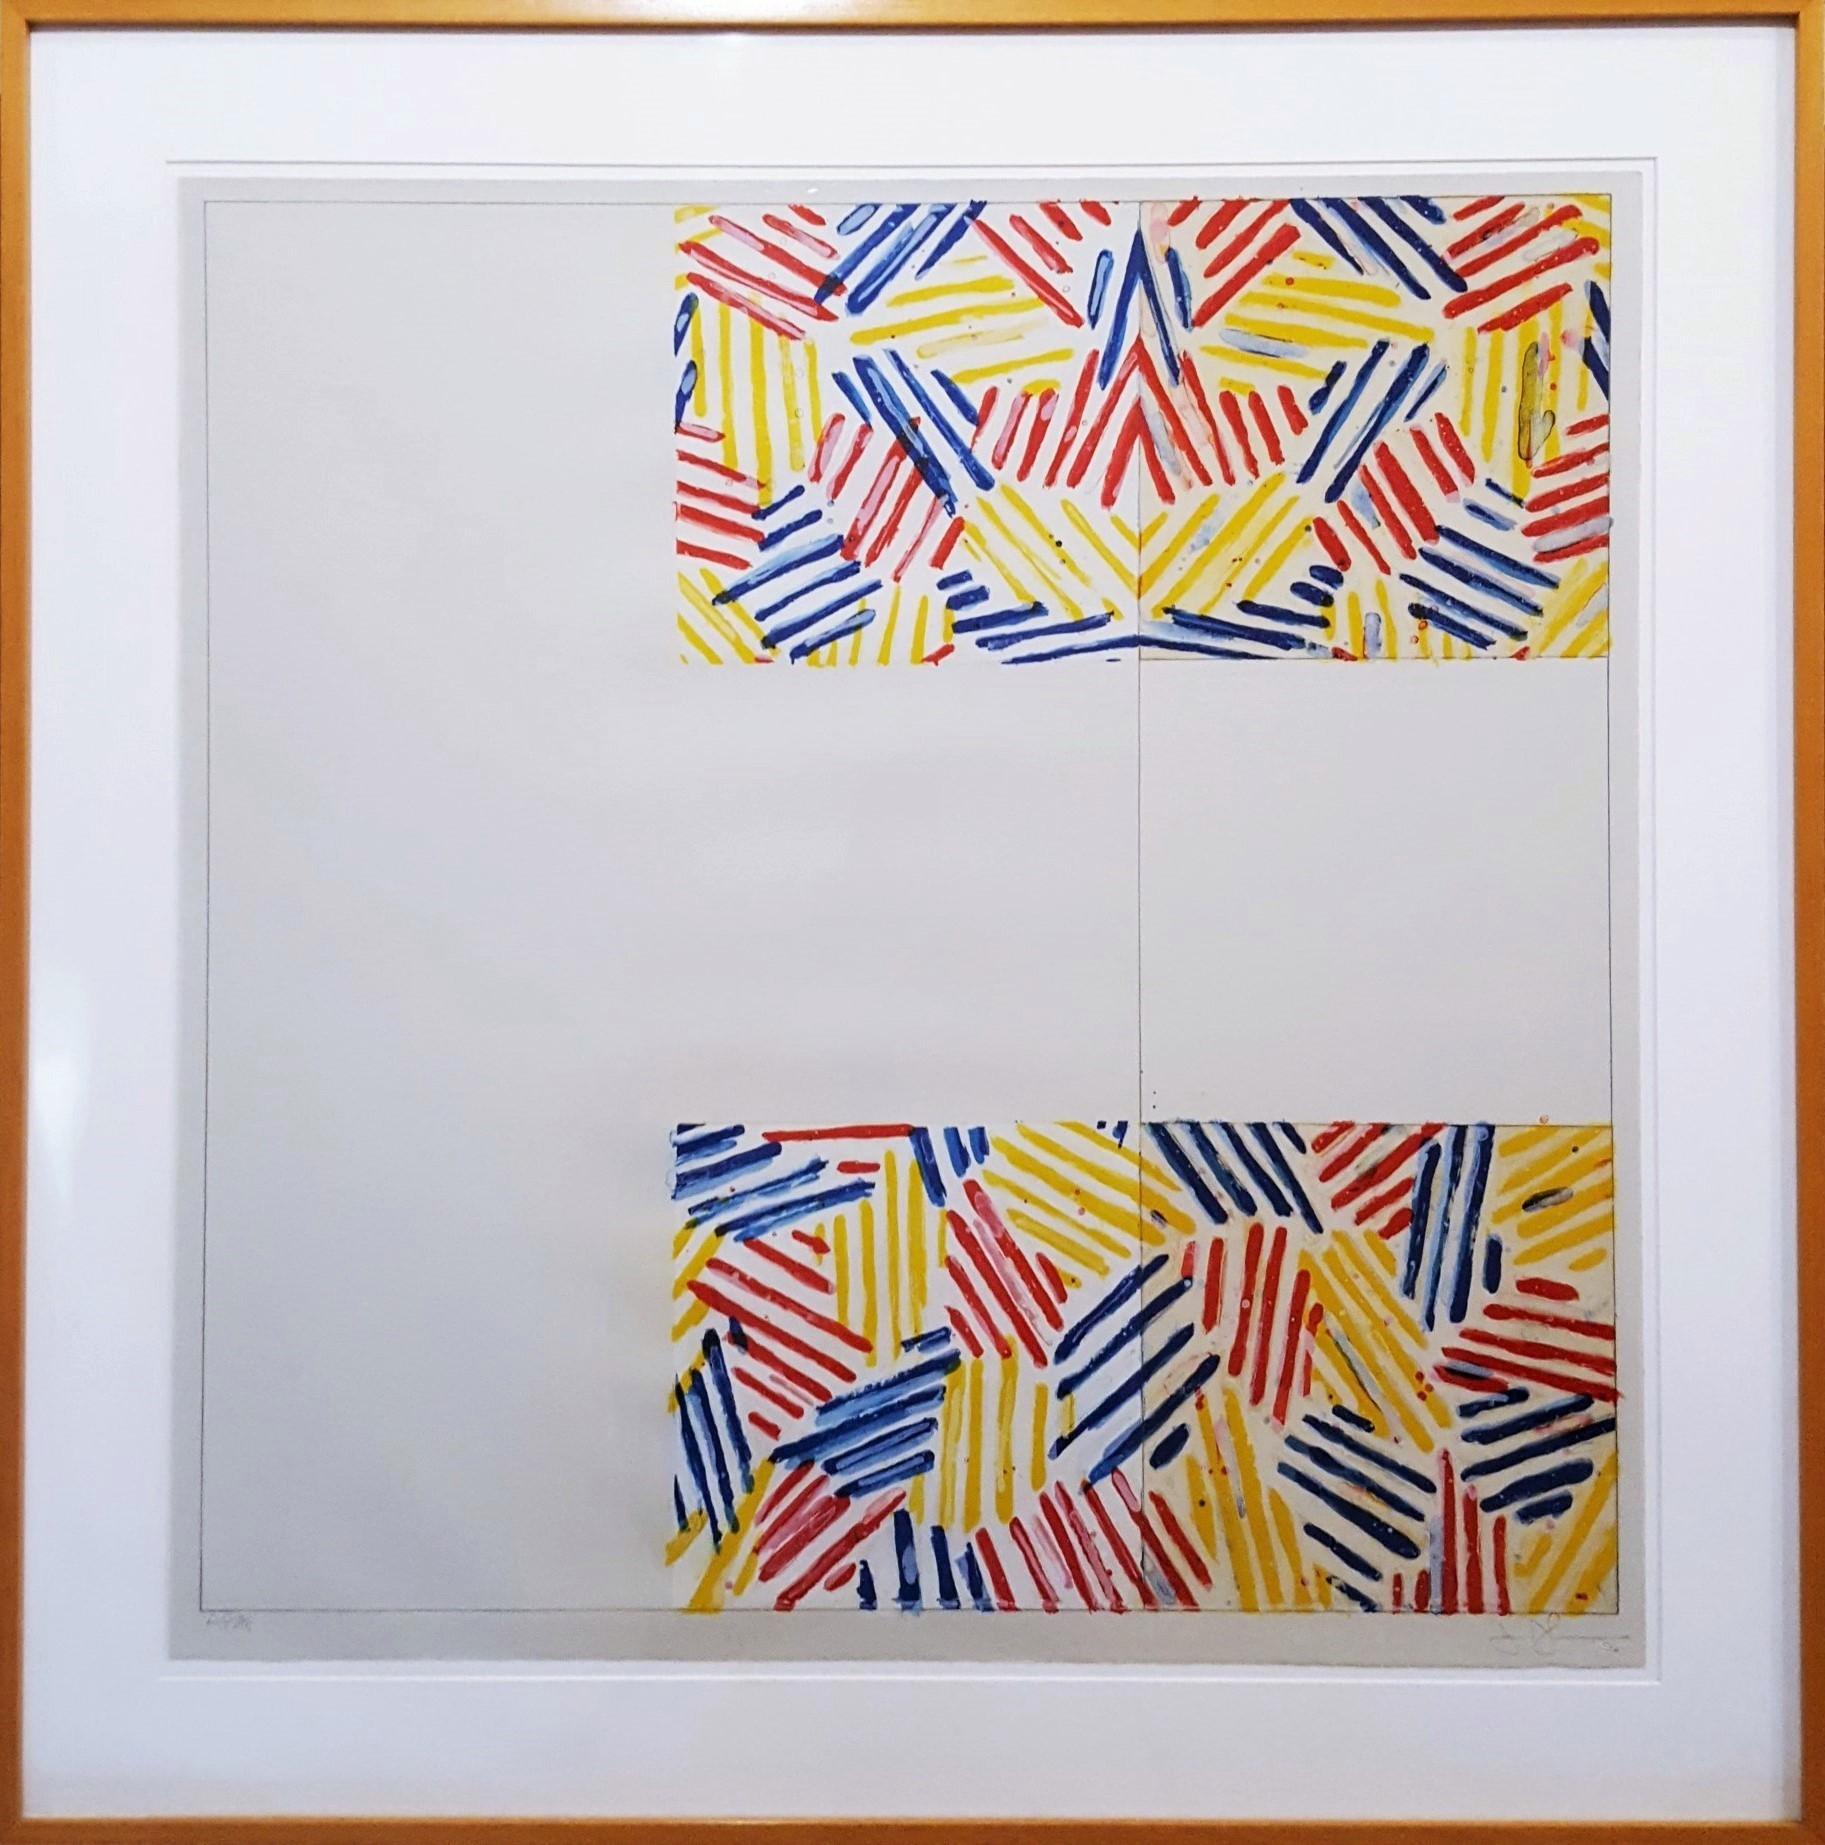 #2 (after 'Untitled 1975') - Print by Jasper Johns